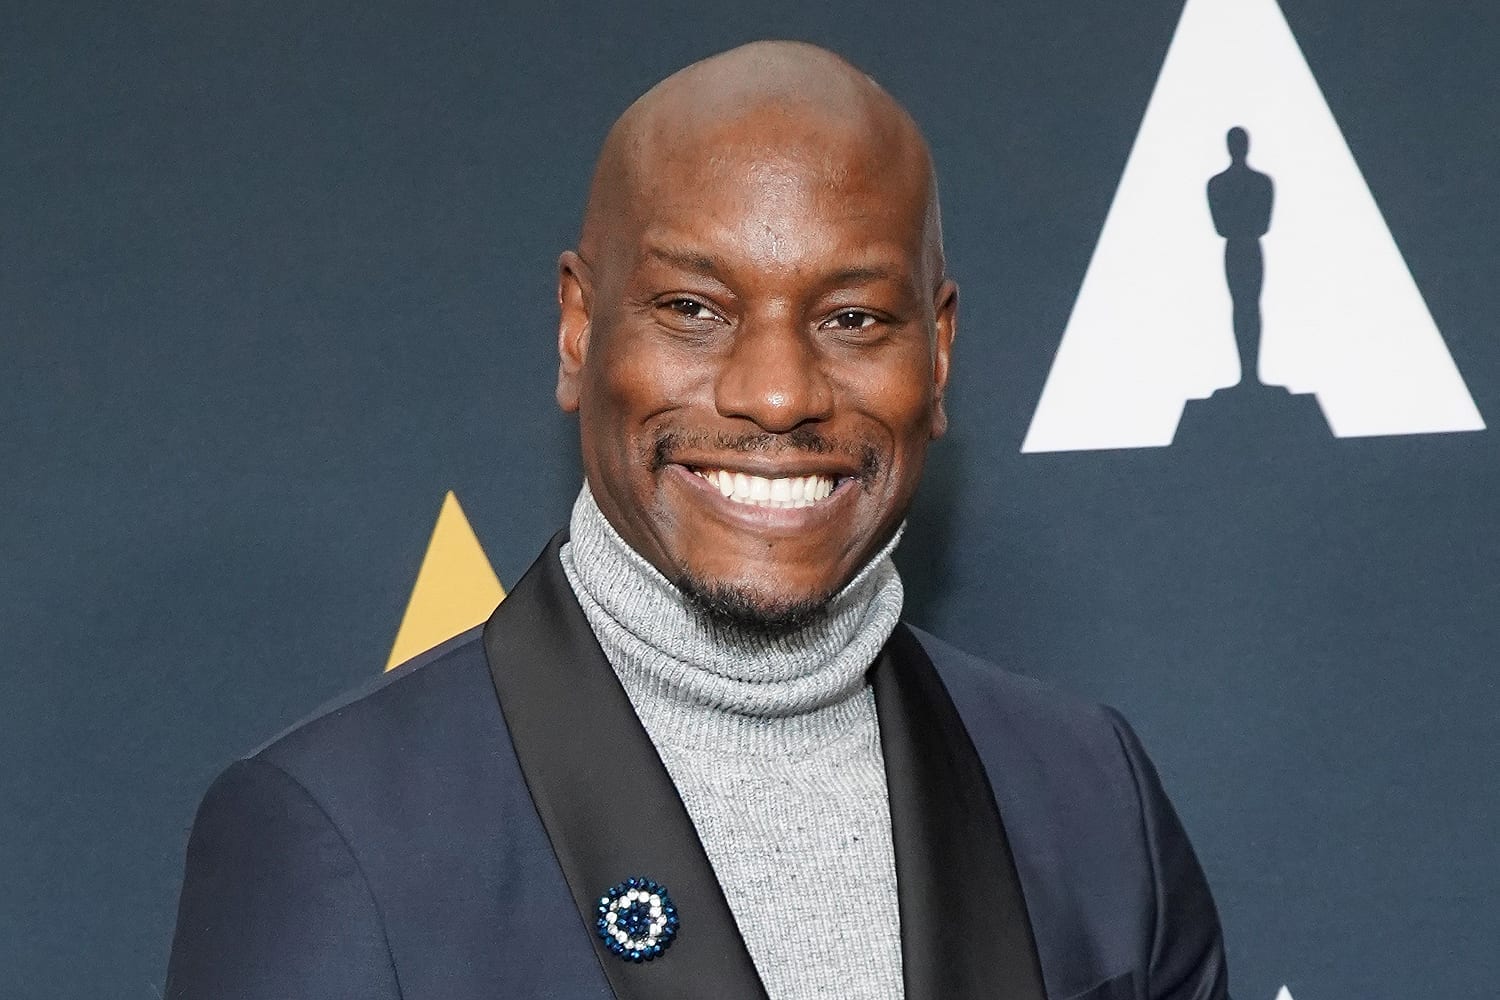 Tyrese Gibson Claims He Was Invited To A “Vegan Sex Party”